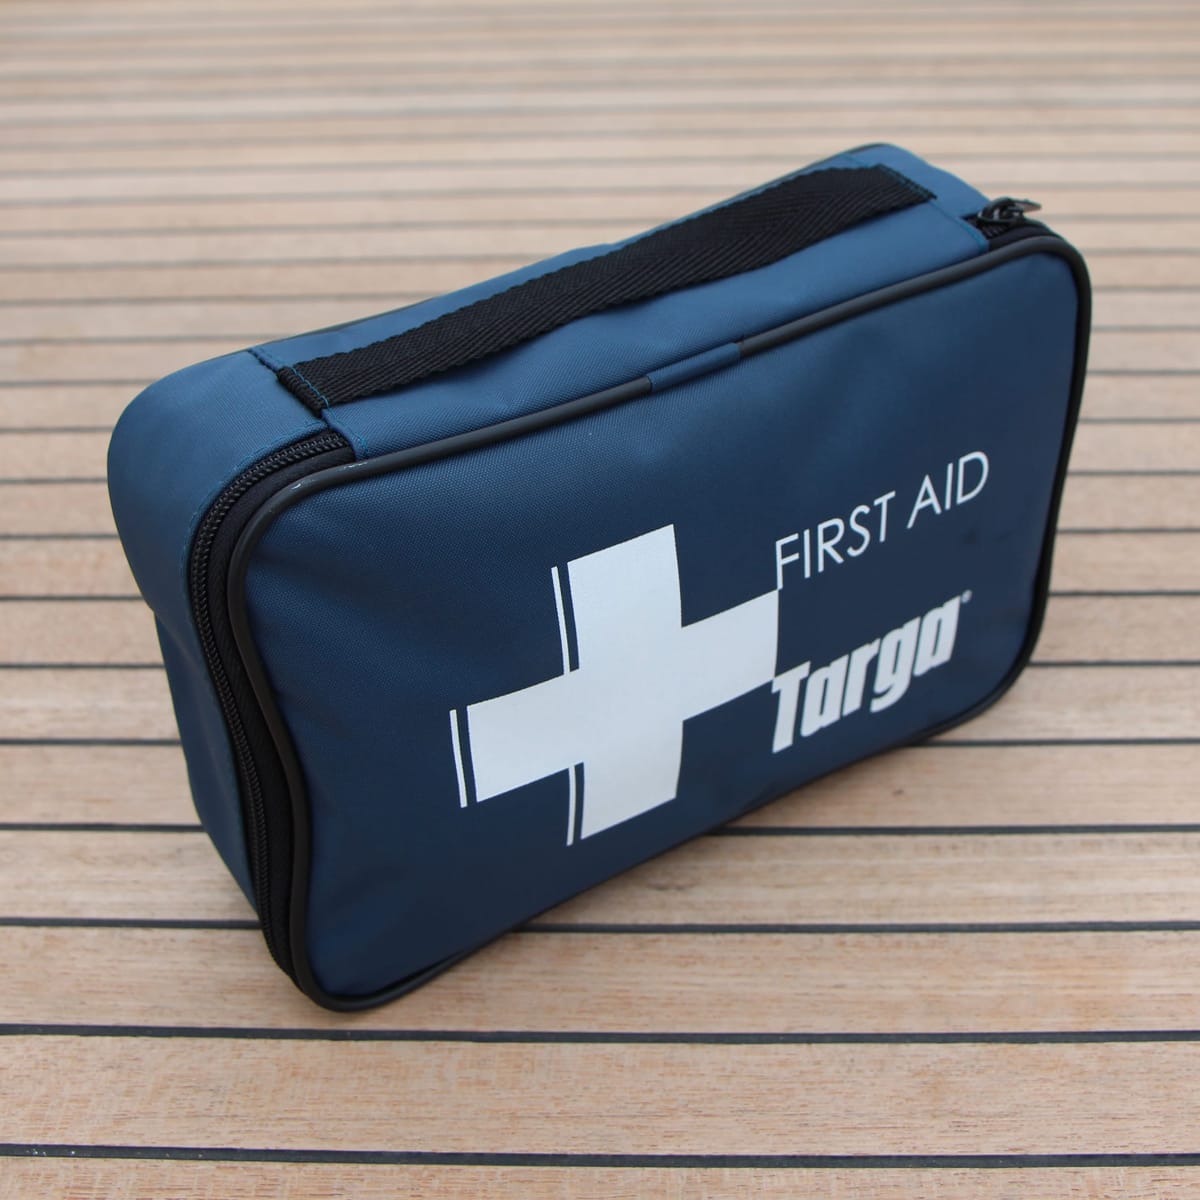 A first aid kit with content adapted to the life on board